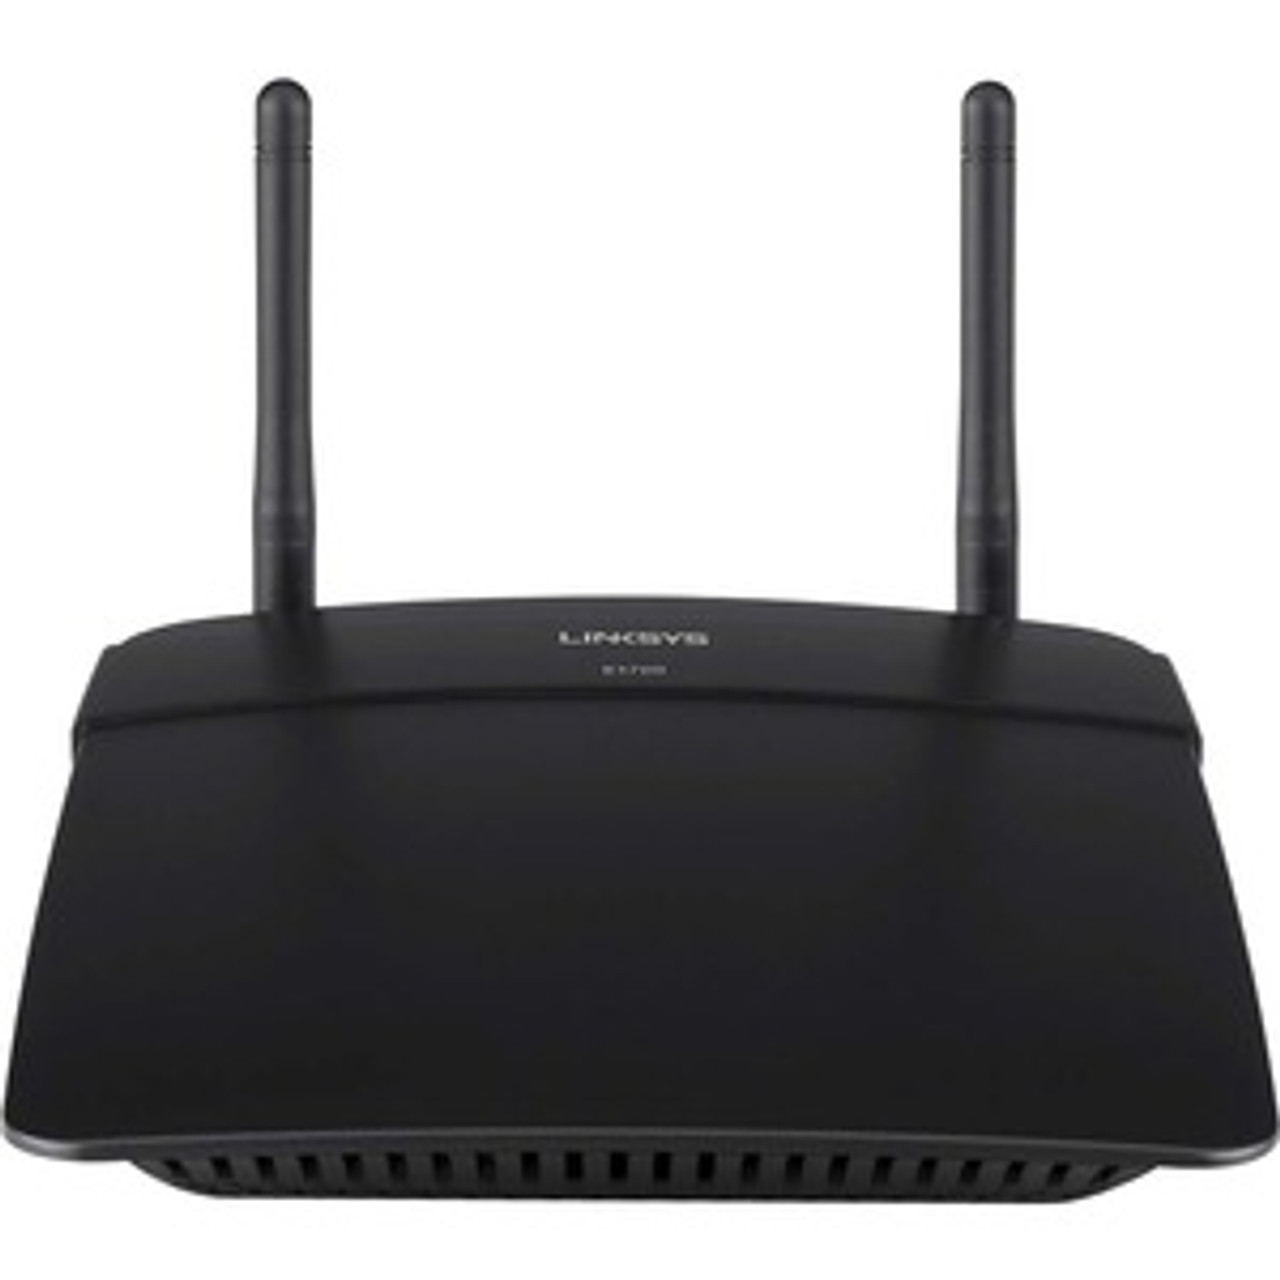 E1700-FFP Linksys N300+ IEEE 802.11n 2.40 GHz Ethernet Wireless Router with Flexible Antennas (Refurbished)